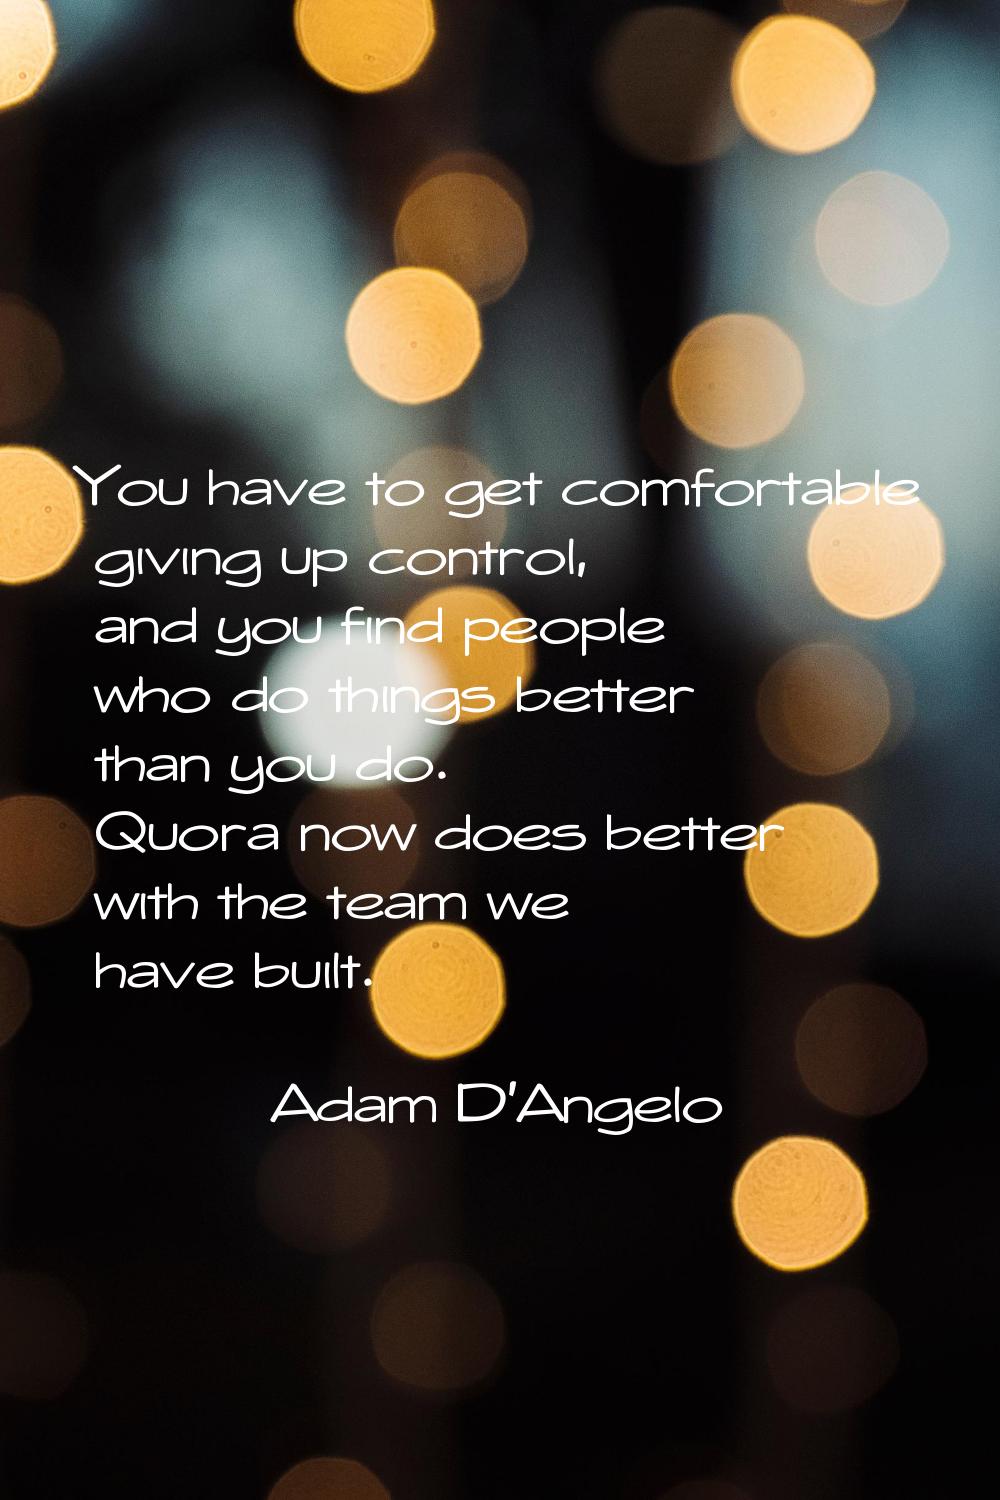 You have to get comfortable giving up control, and you find people who do things better than you do